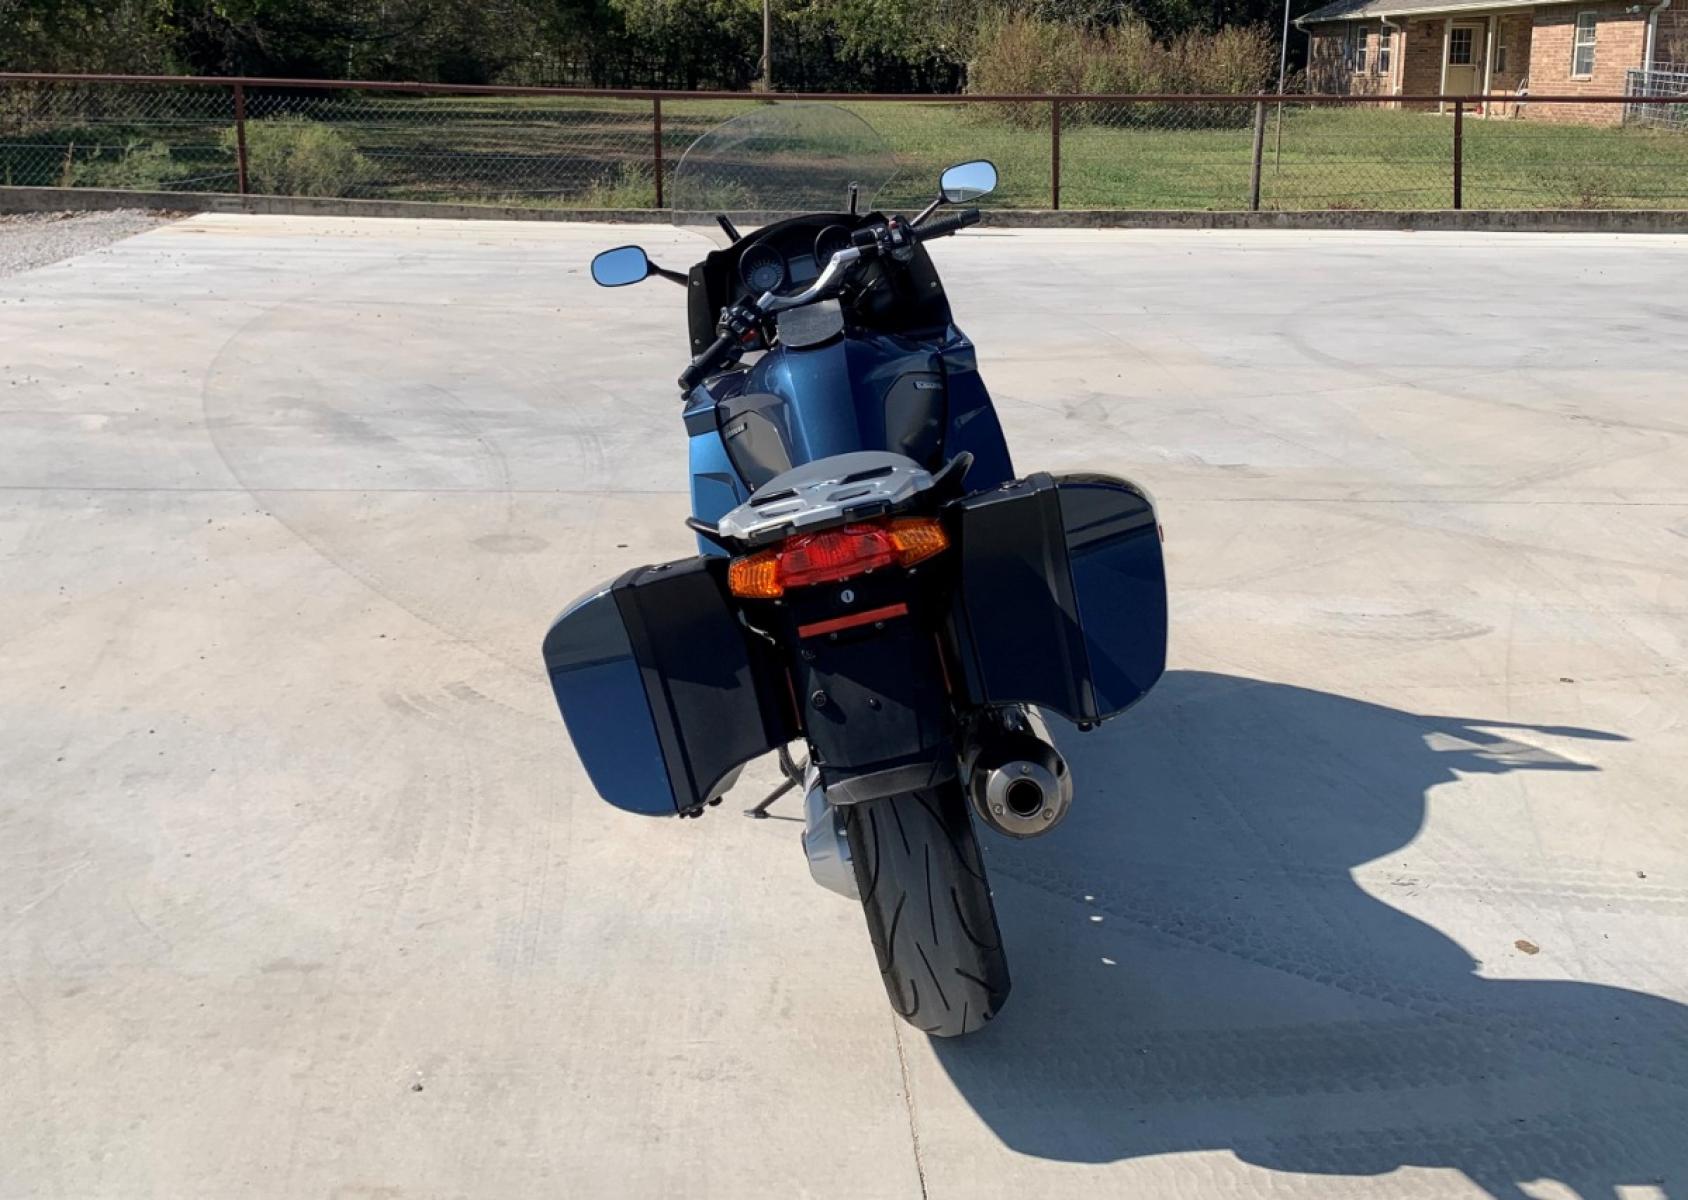 2007 BLUE BMW K1200GT K1200 (WB10597087Z) with an 1157CC engine, located at 17760 HWY 62, MORRIS, 74445, 35.609104, -95.877060 - THE 2007 BMW K1200GT IS A SPORT-TOURING MOTORCYCLE MADE BY BMW. THE SECOND GENERATION K1200GT, INTRODUCED IN 2006, USES ESSENTULY THE SAME INLINE-4 ENGINE AS THE BMW K1200S SPORTSBIKE, WHICH HELD THE WORLD SPEED RECORD IN 2005 FOR ITS CLASS AT 279.33 km/h (173.57 mph), AND THE K1200R. THE NEW MODEL - Photo #5